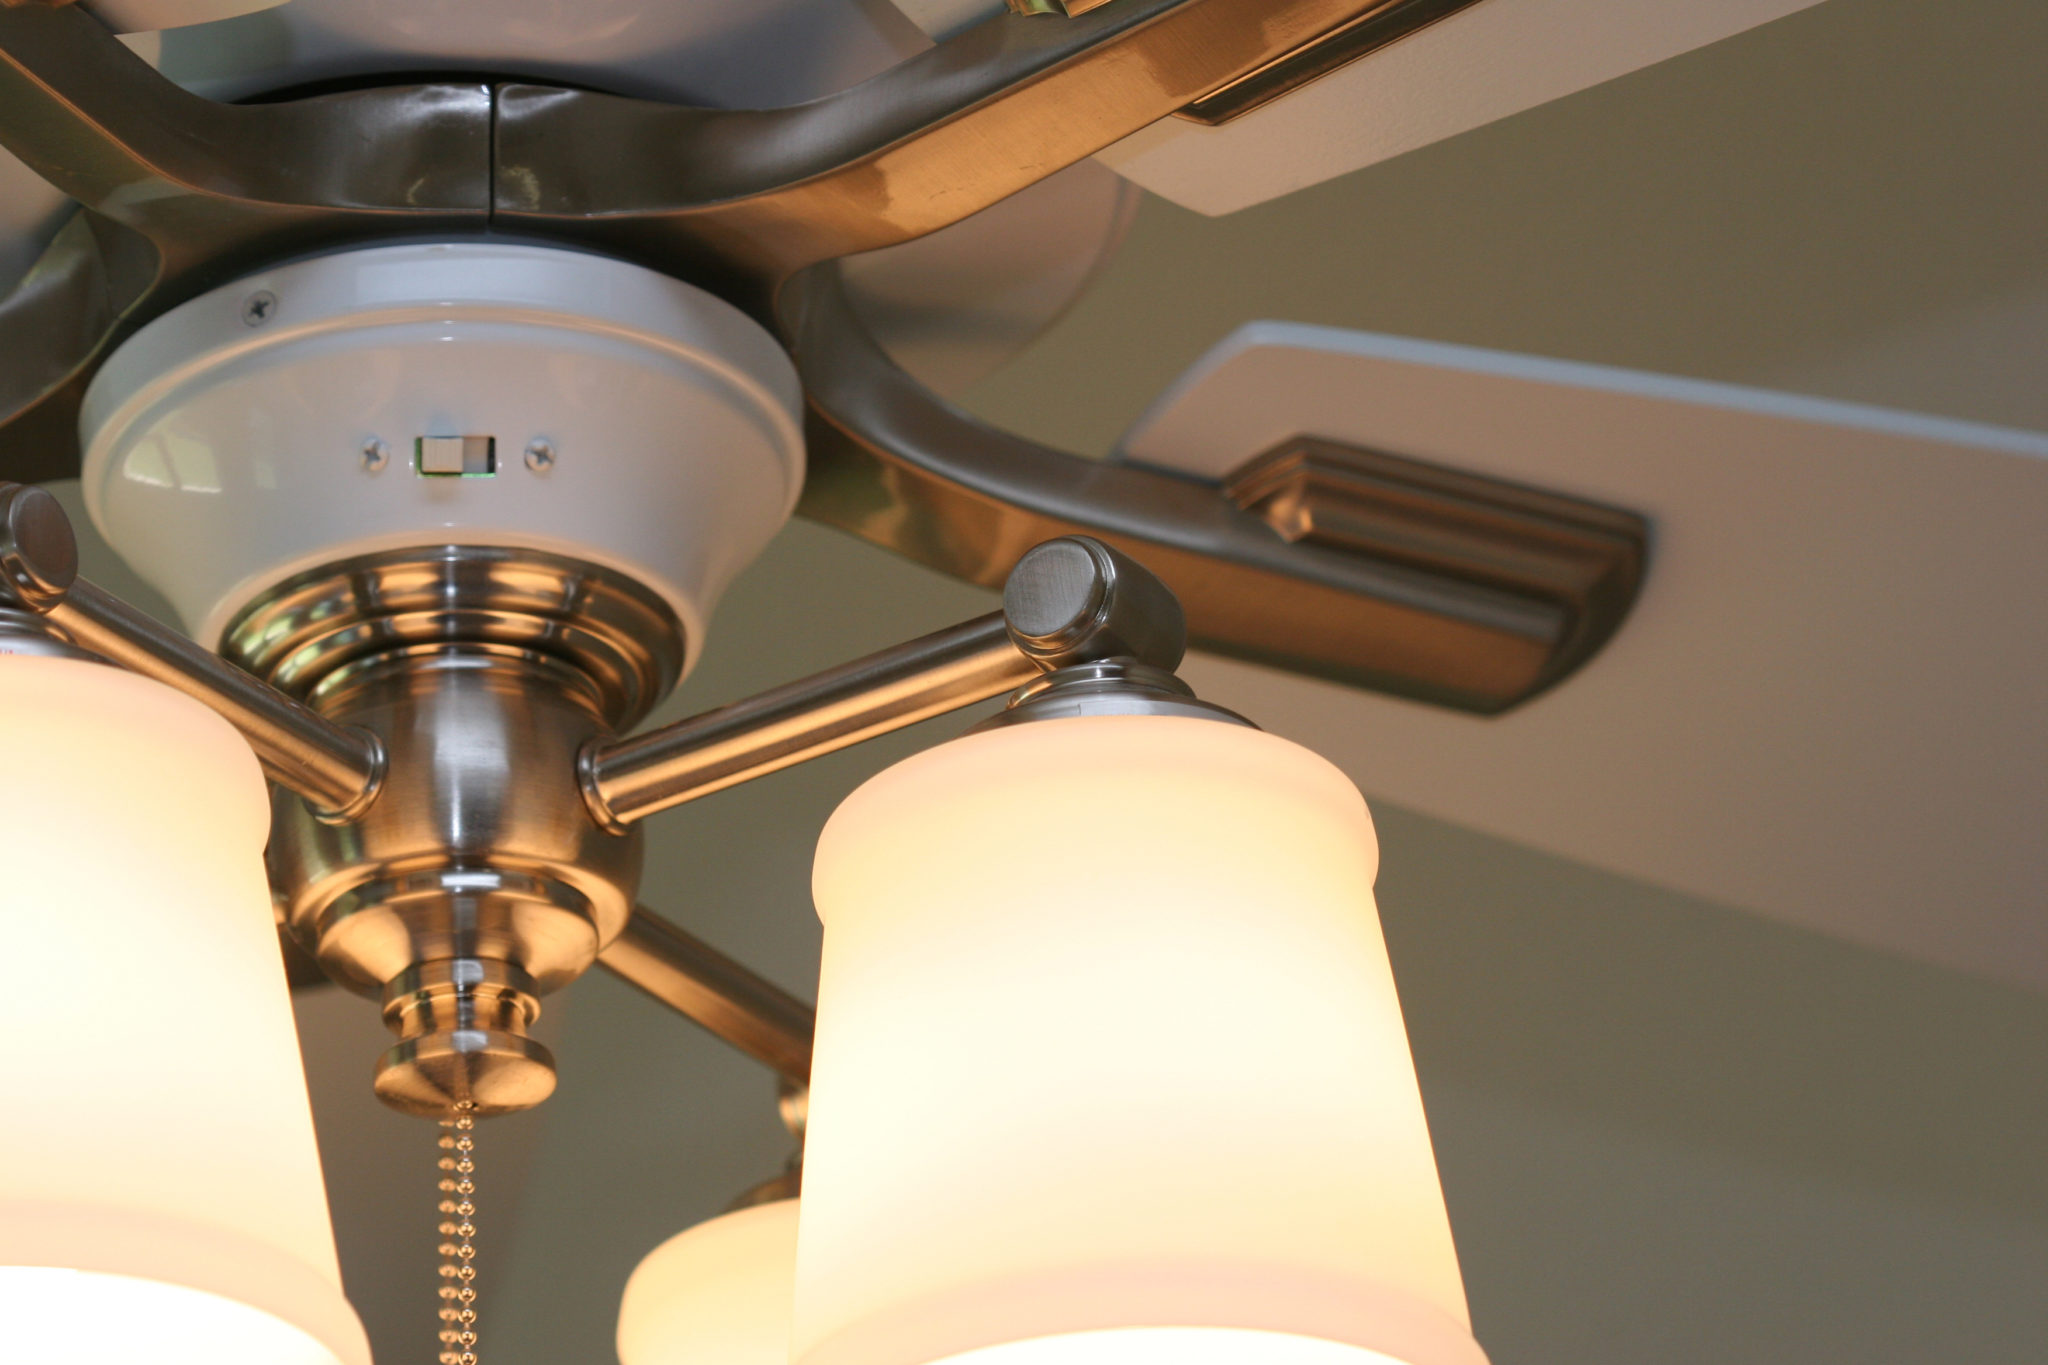 How To Replace A Light Fixture With Ceiling Fan The Money Pit